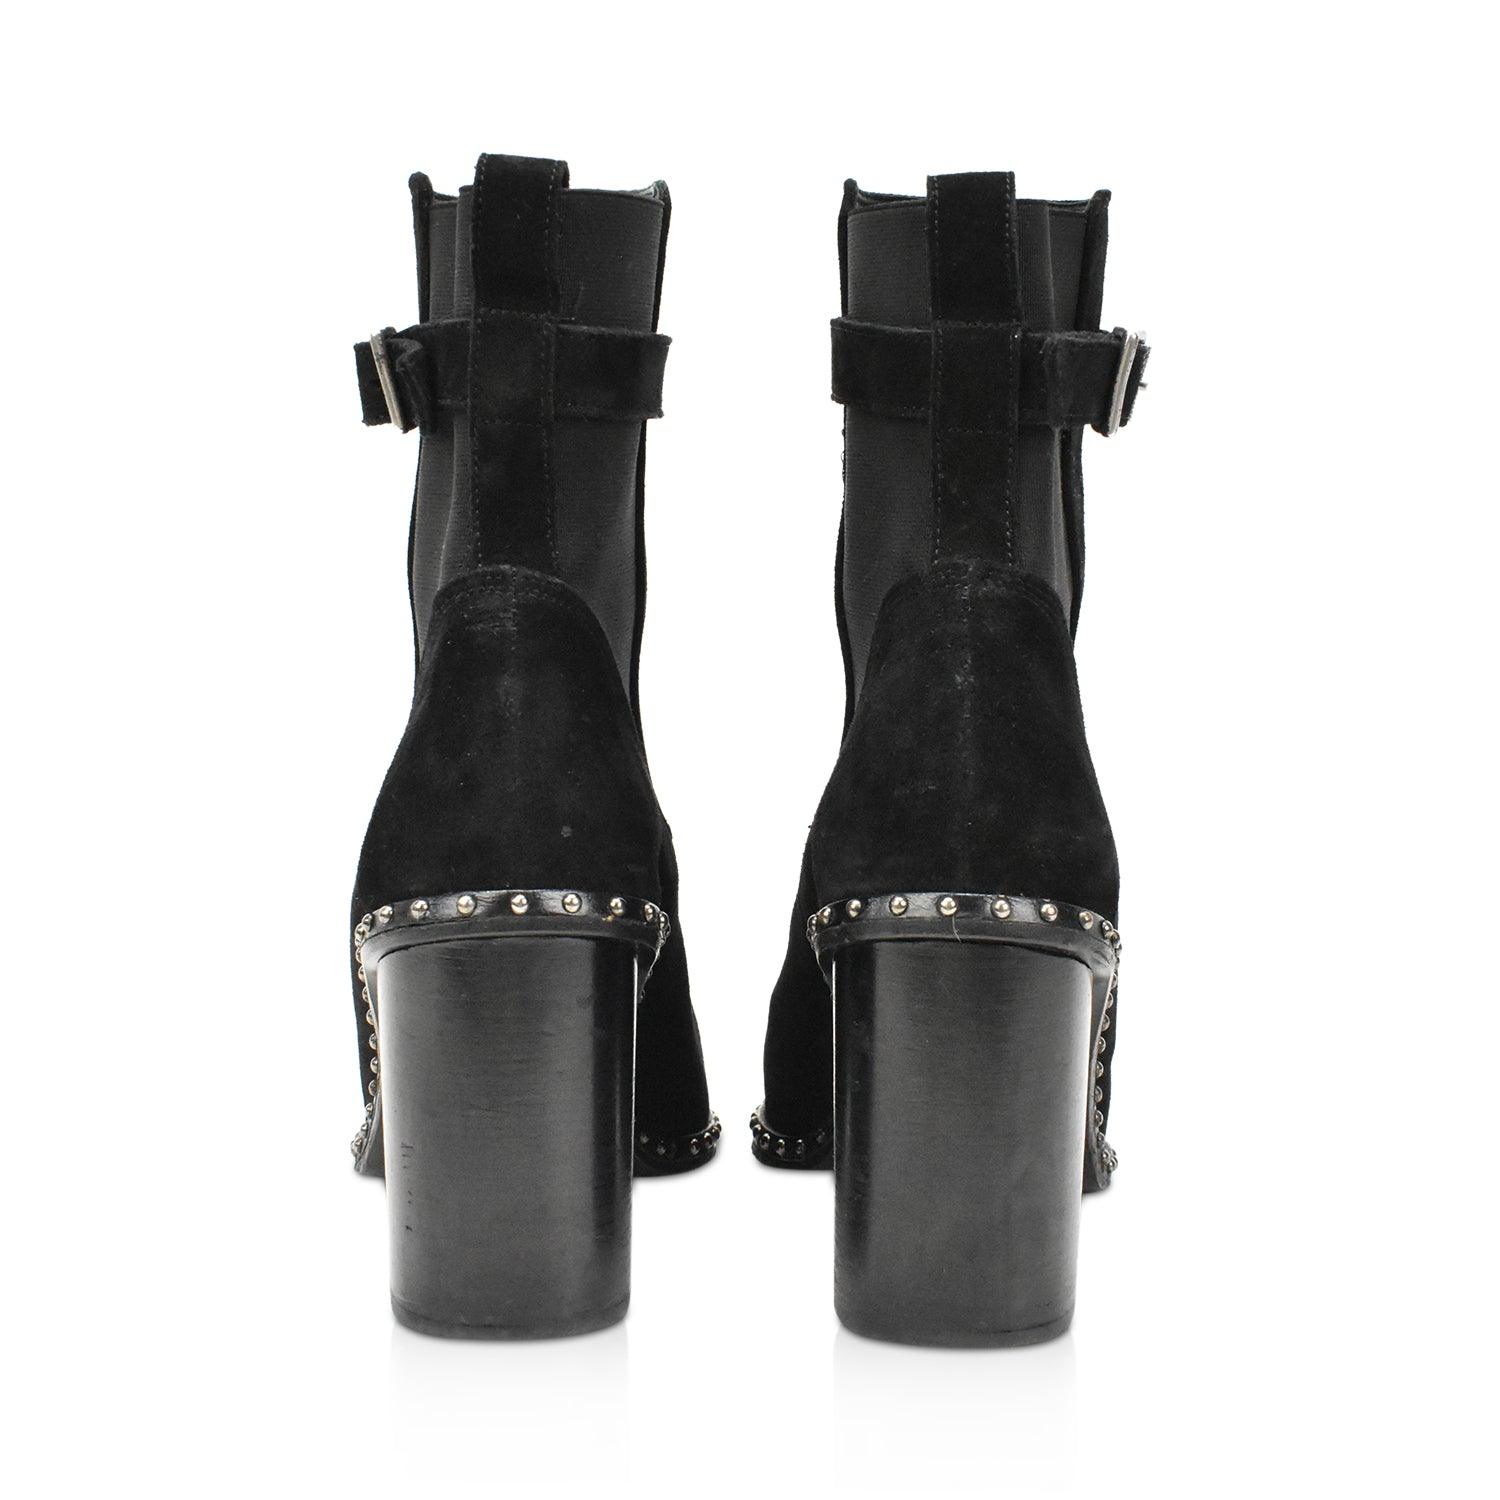 Rag & Bone Ankle Boots - Women's 39.5 - Fashionably Yours